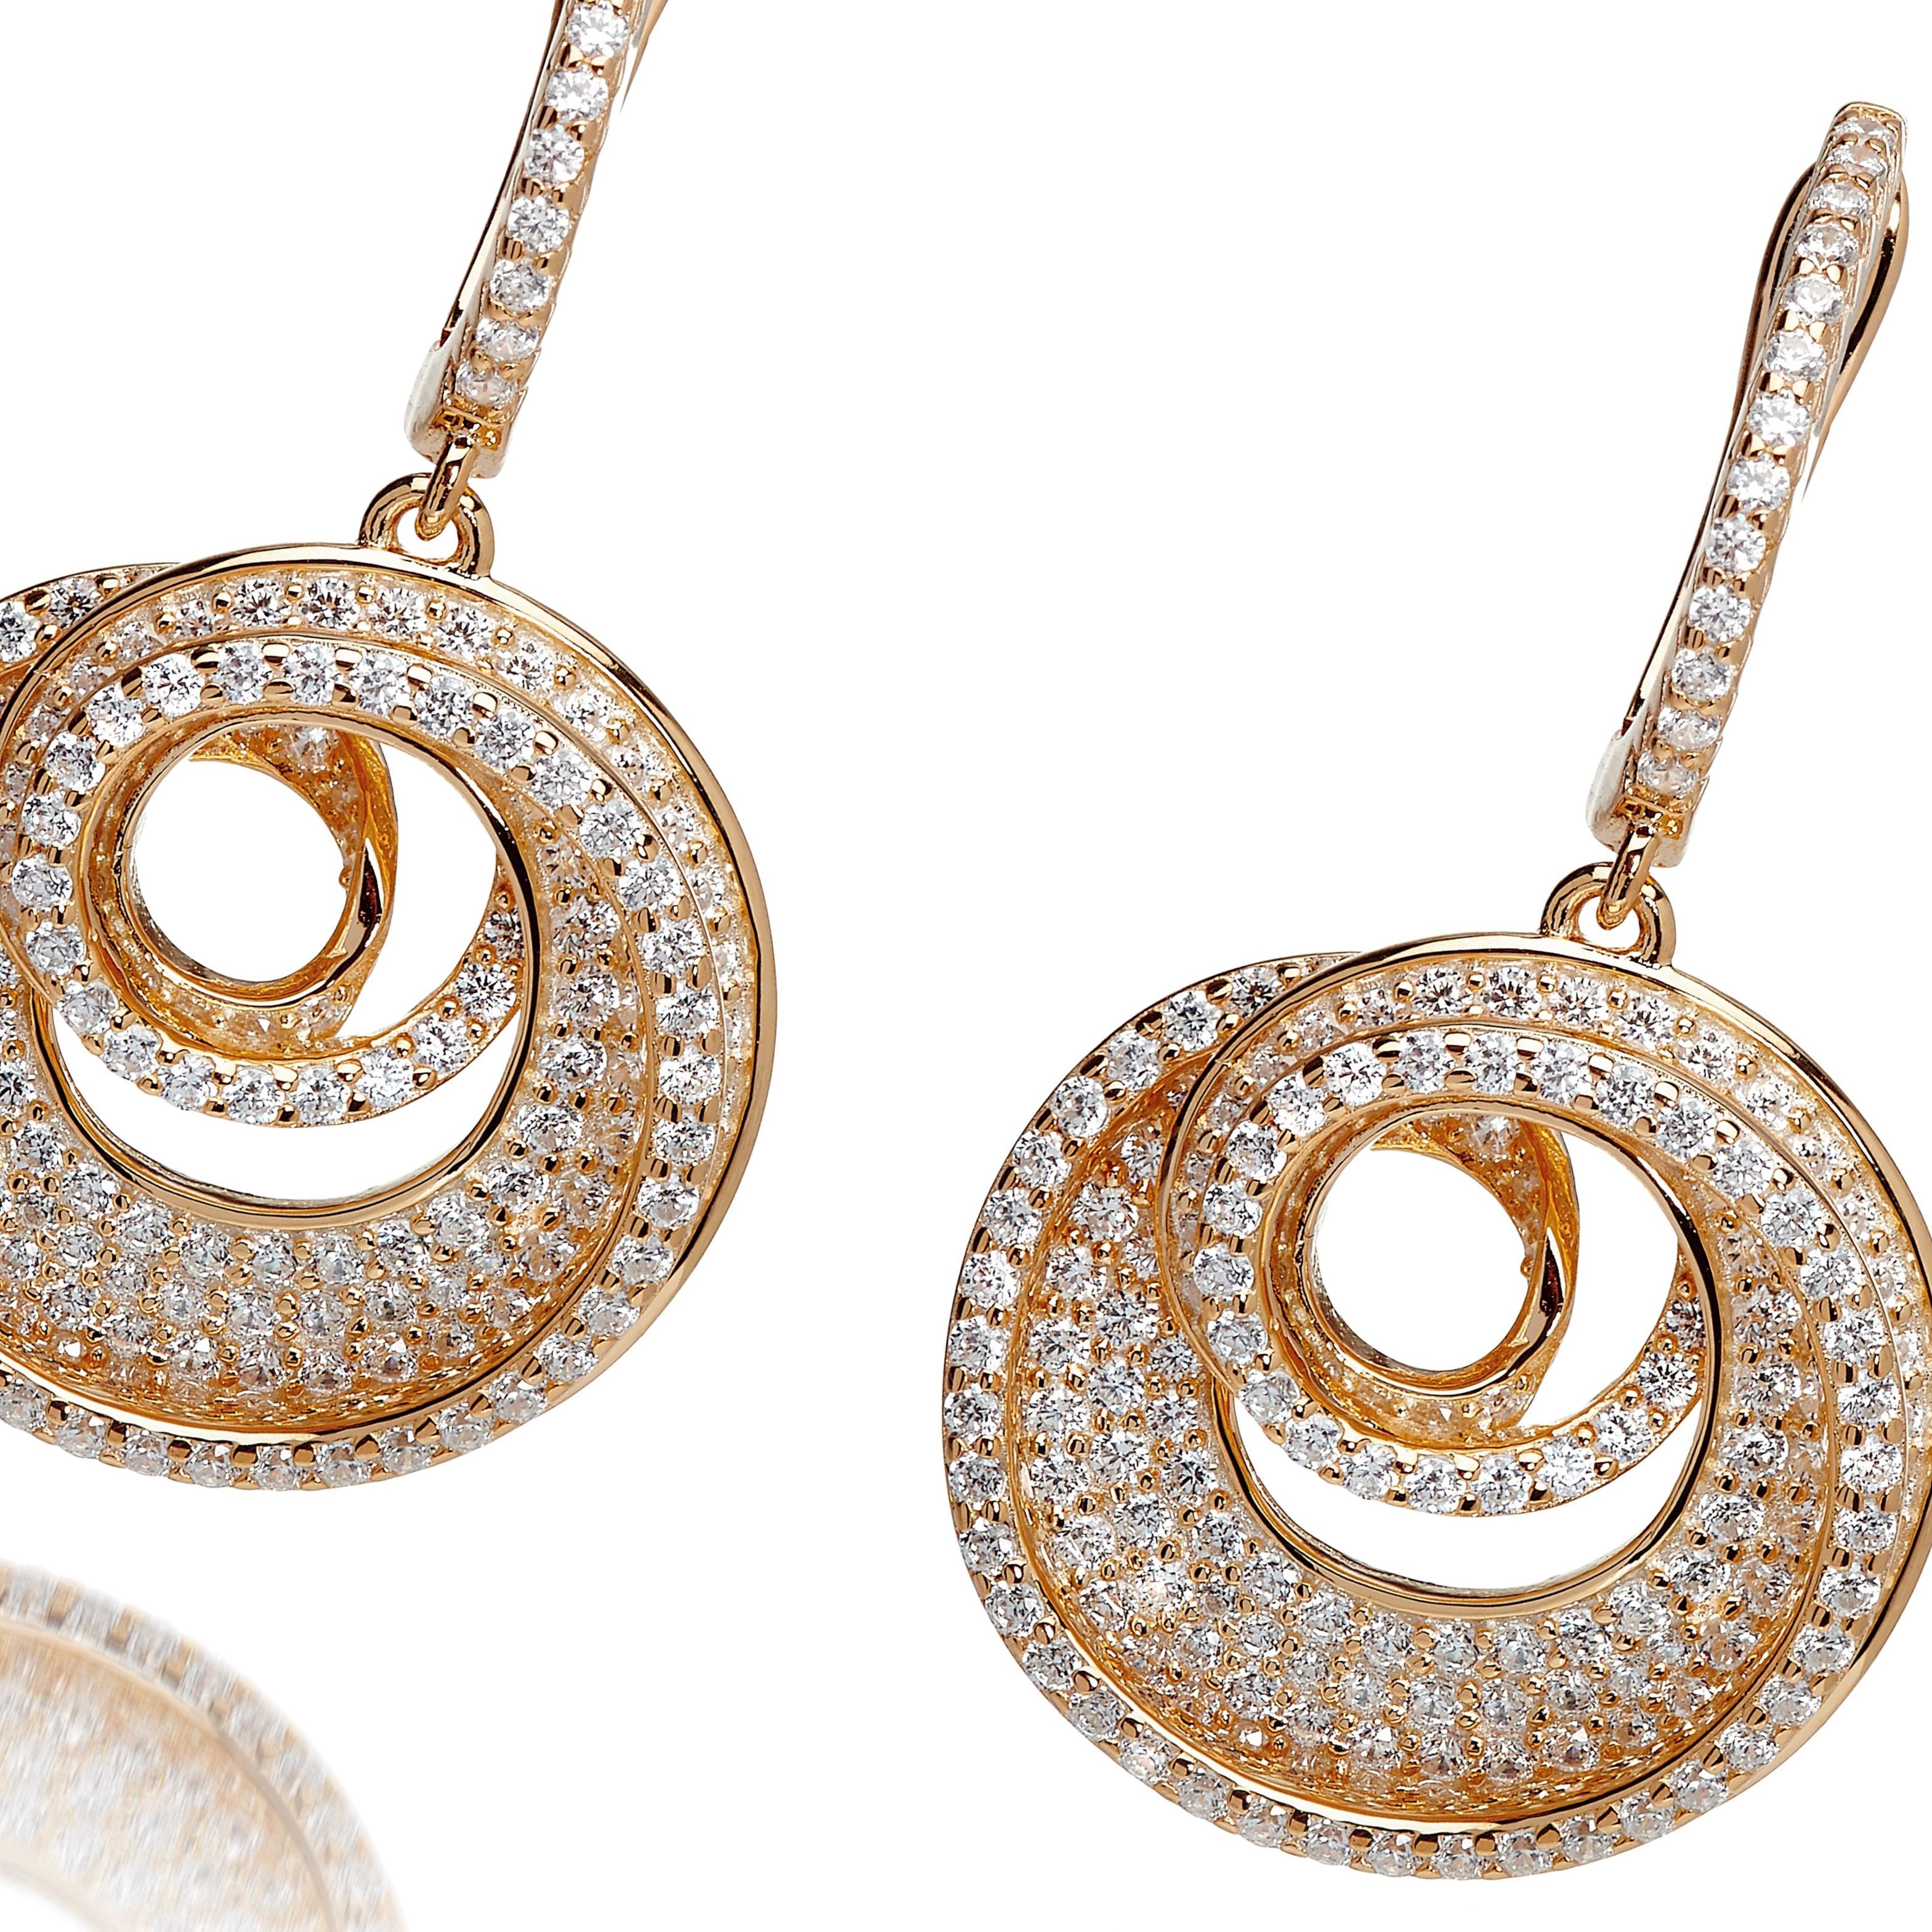 An exquisite pair of spiral drop earrings, in a unique contemporary design.

Featuring 390 round brilliant cut cubic zirconia, suspended below a lever back clasp set with dazzling round brilliant cuts.

Composed of 925 sterling silver with a